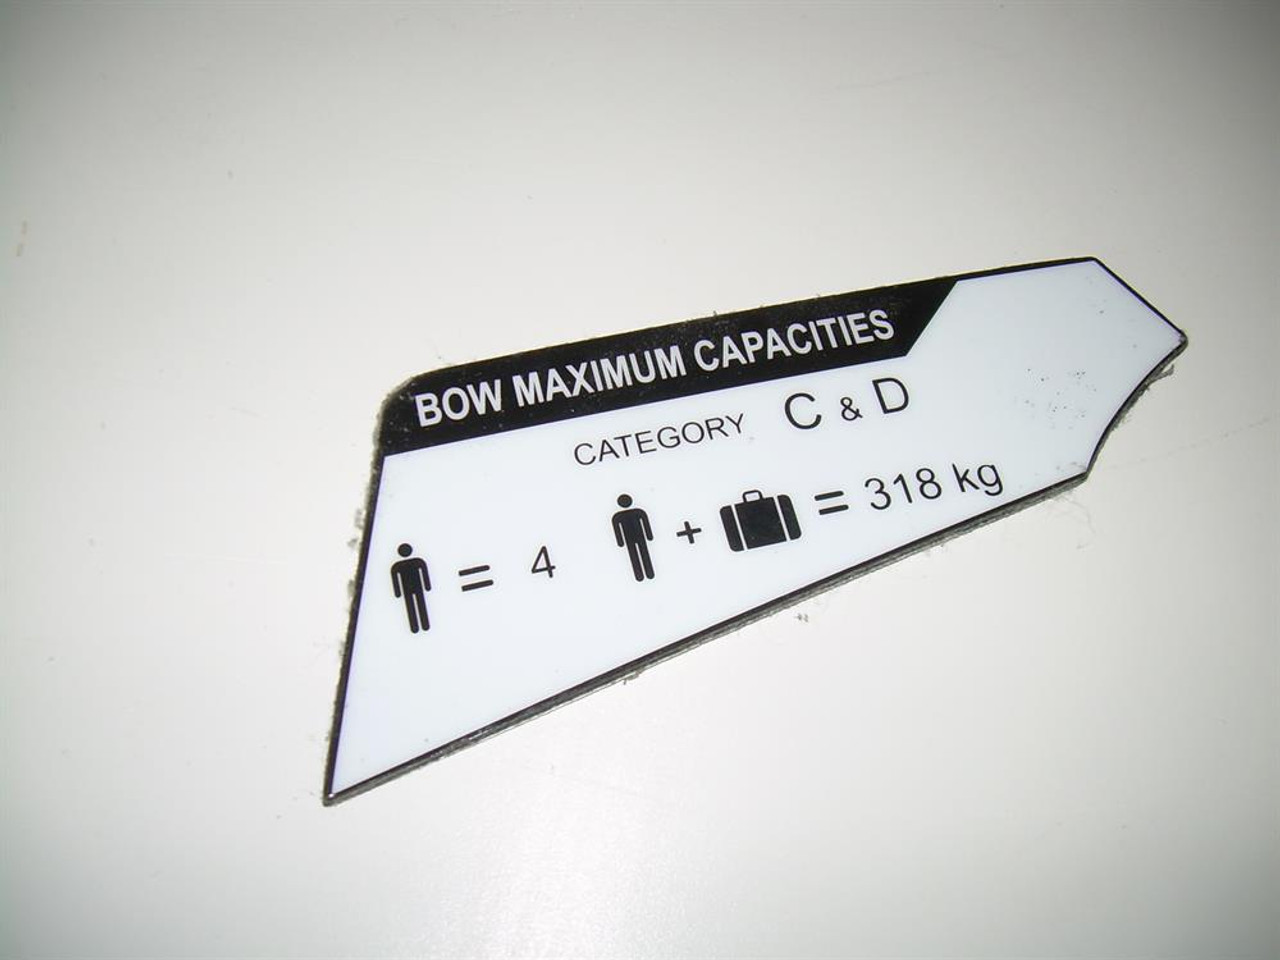 DECAL, MAX CAPACITY BOW CE 4 PERSON GS24